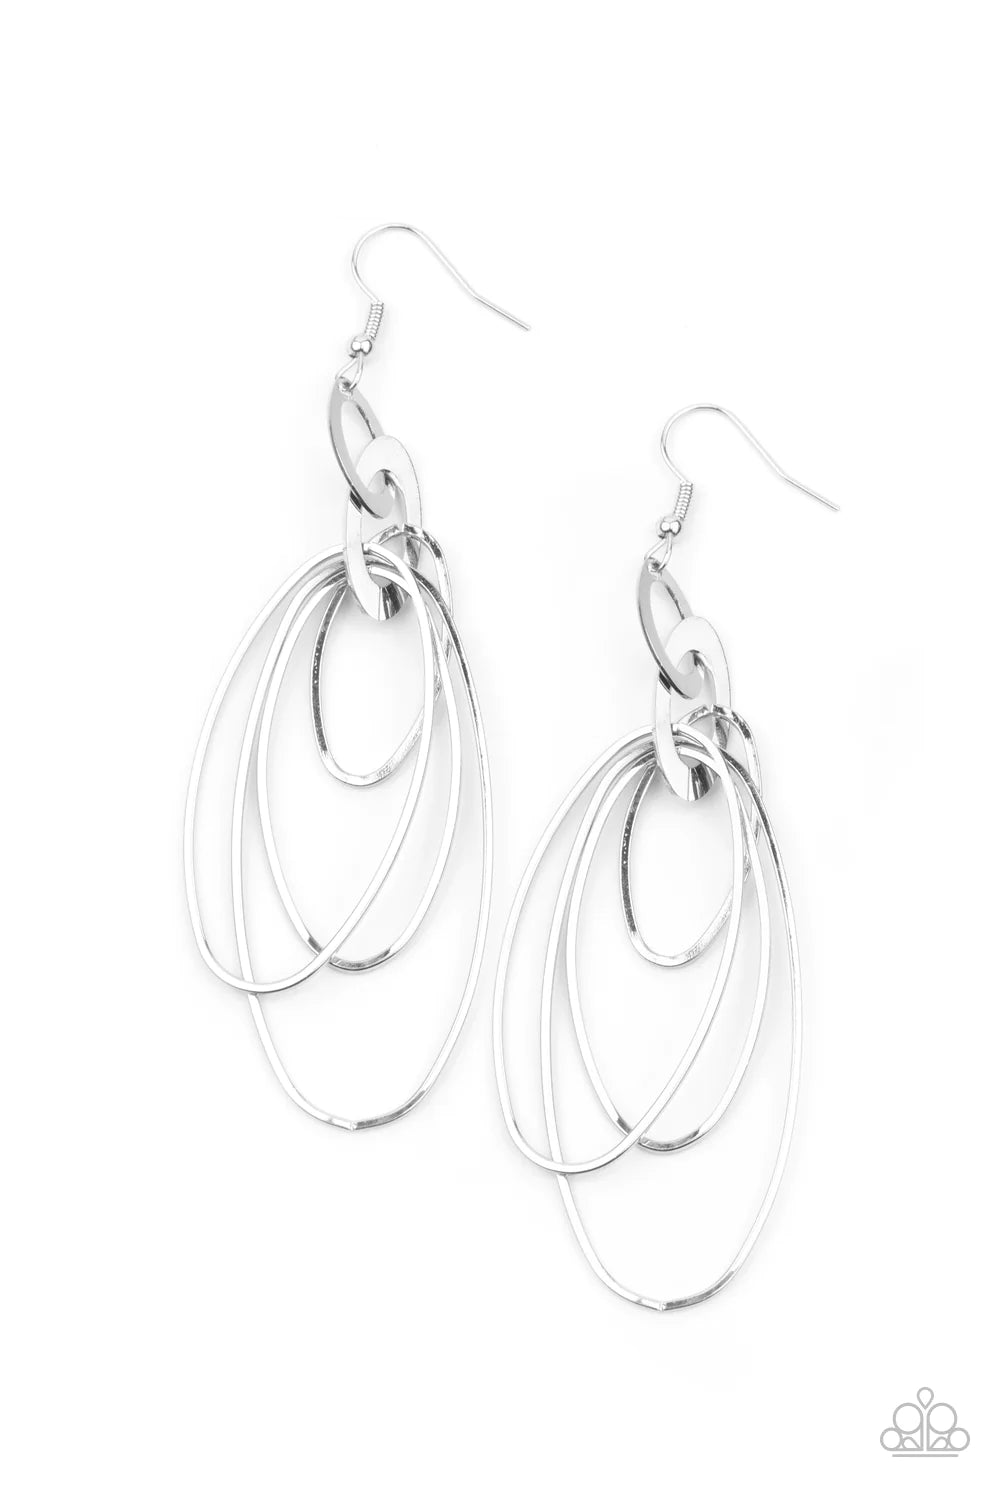 OVAL The Moon- Silver Earrings- Paparazzi Accessories